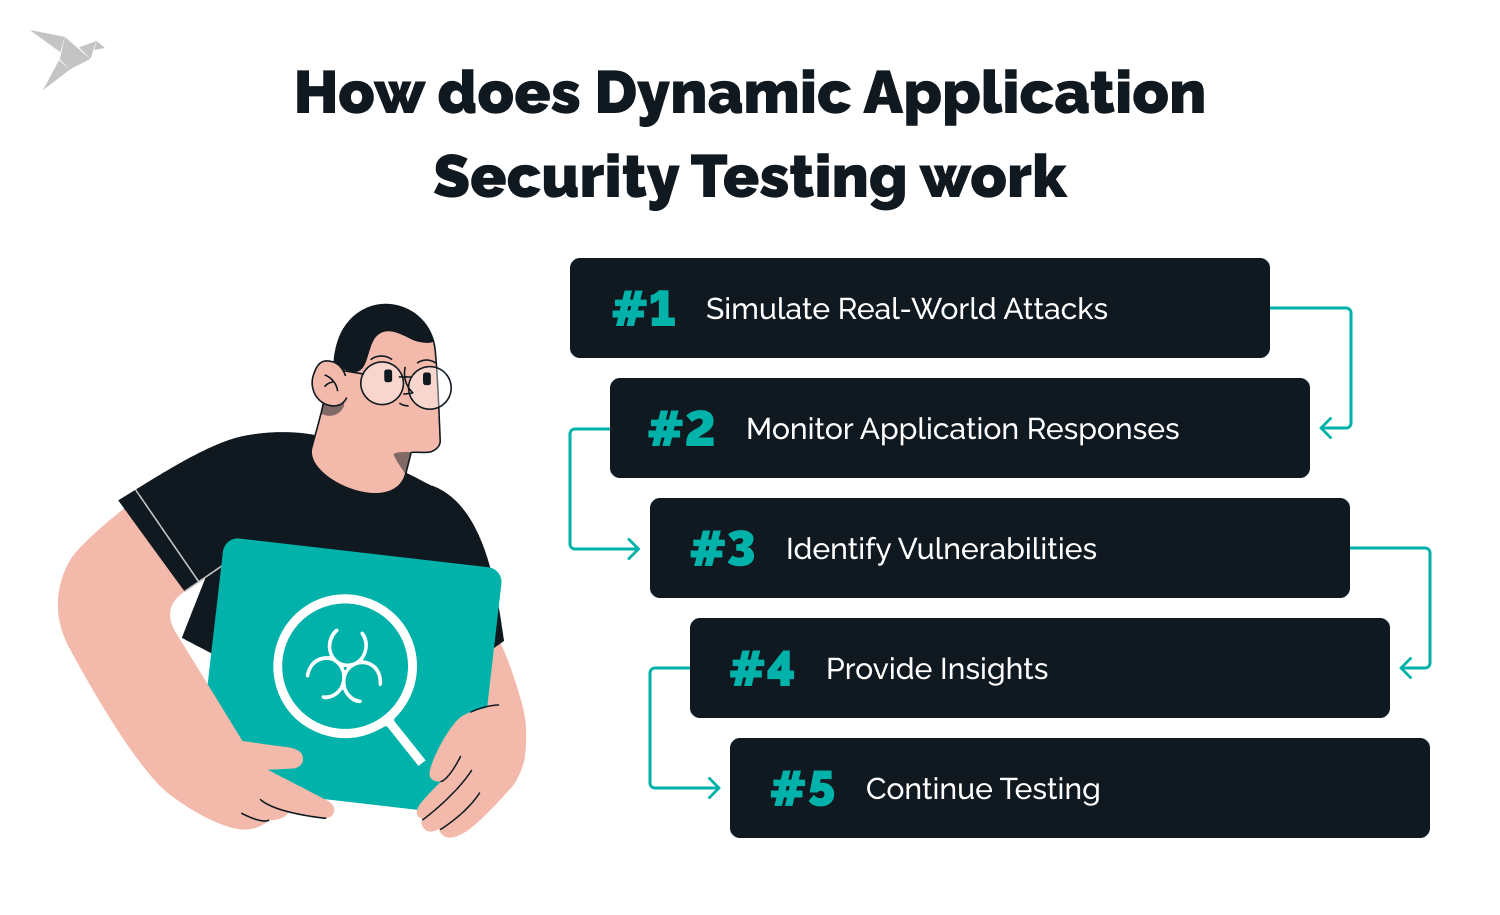 How Does Dynamic Application Security Testing Work